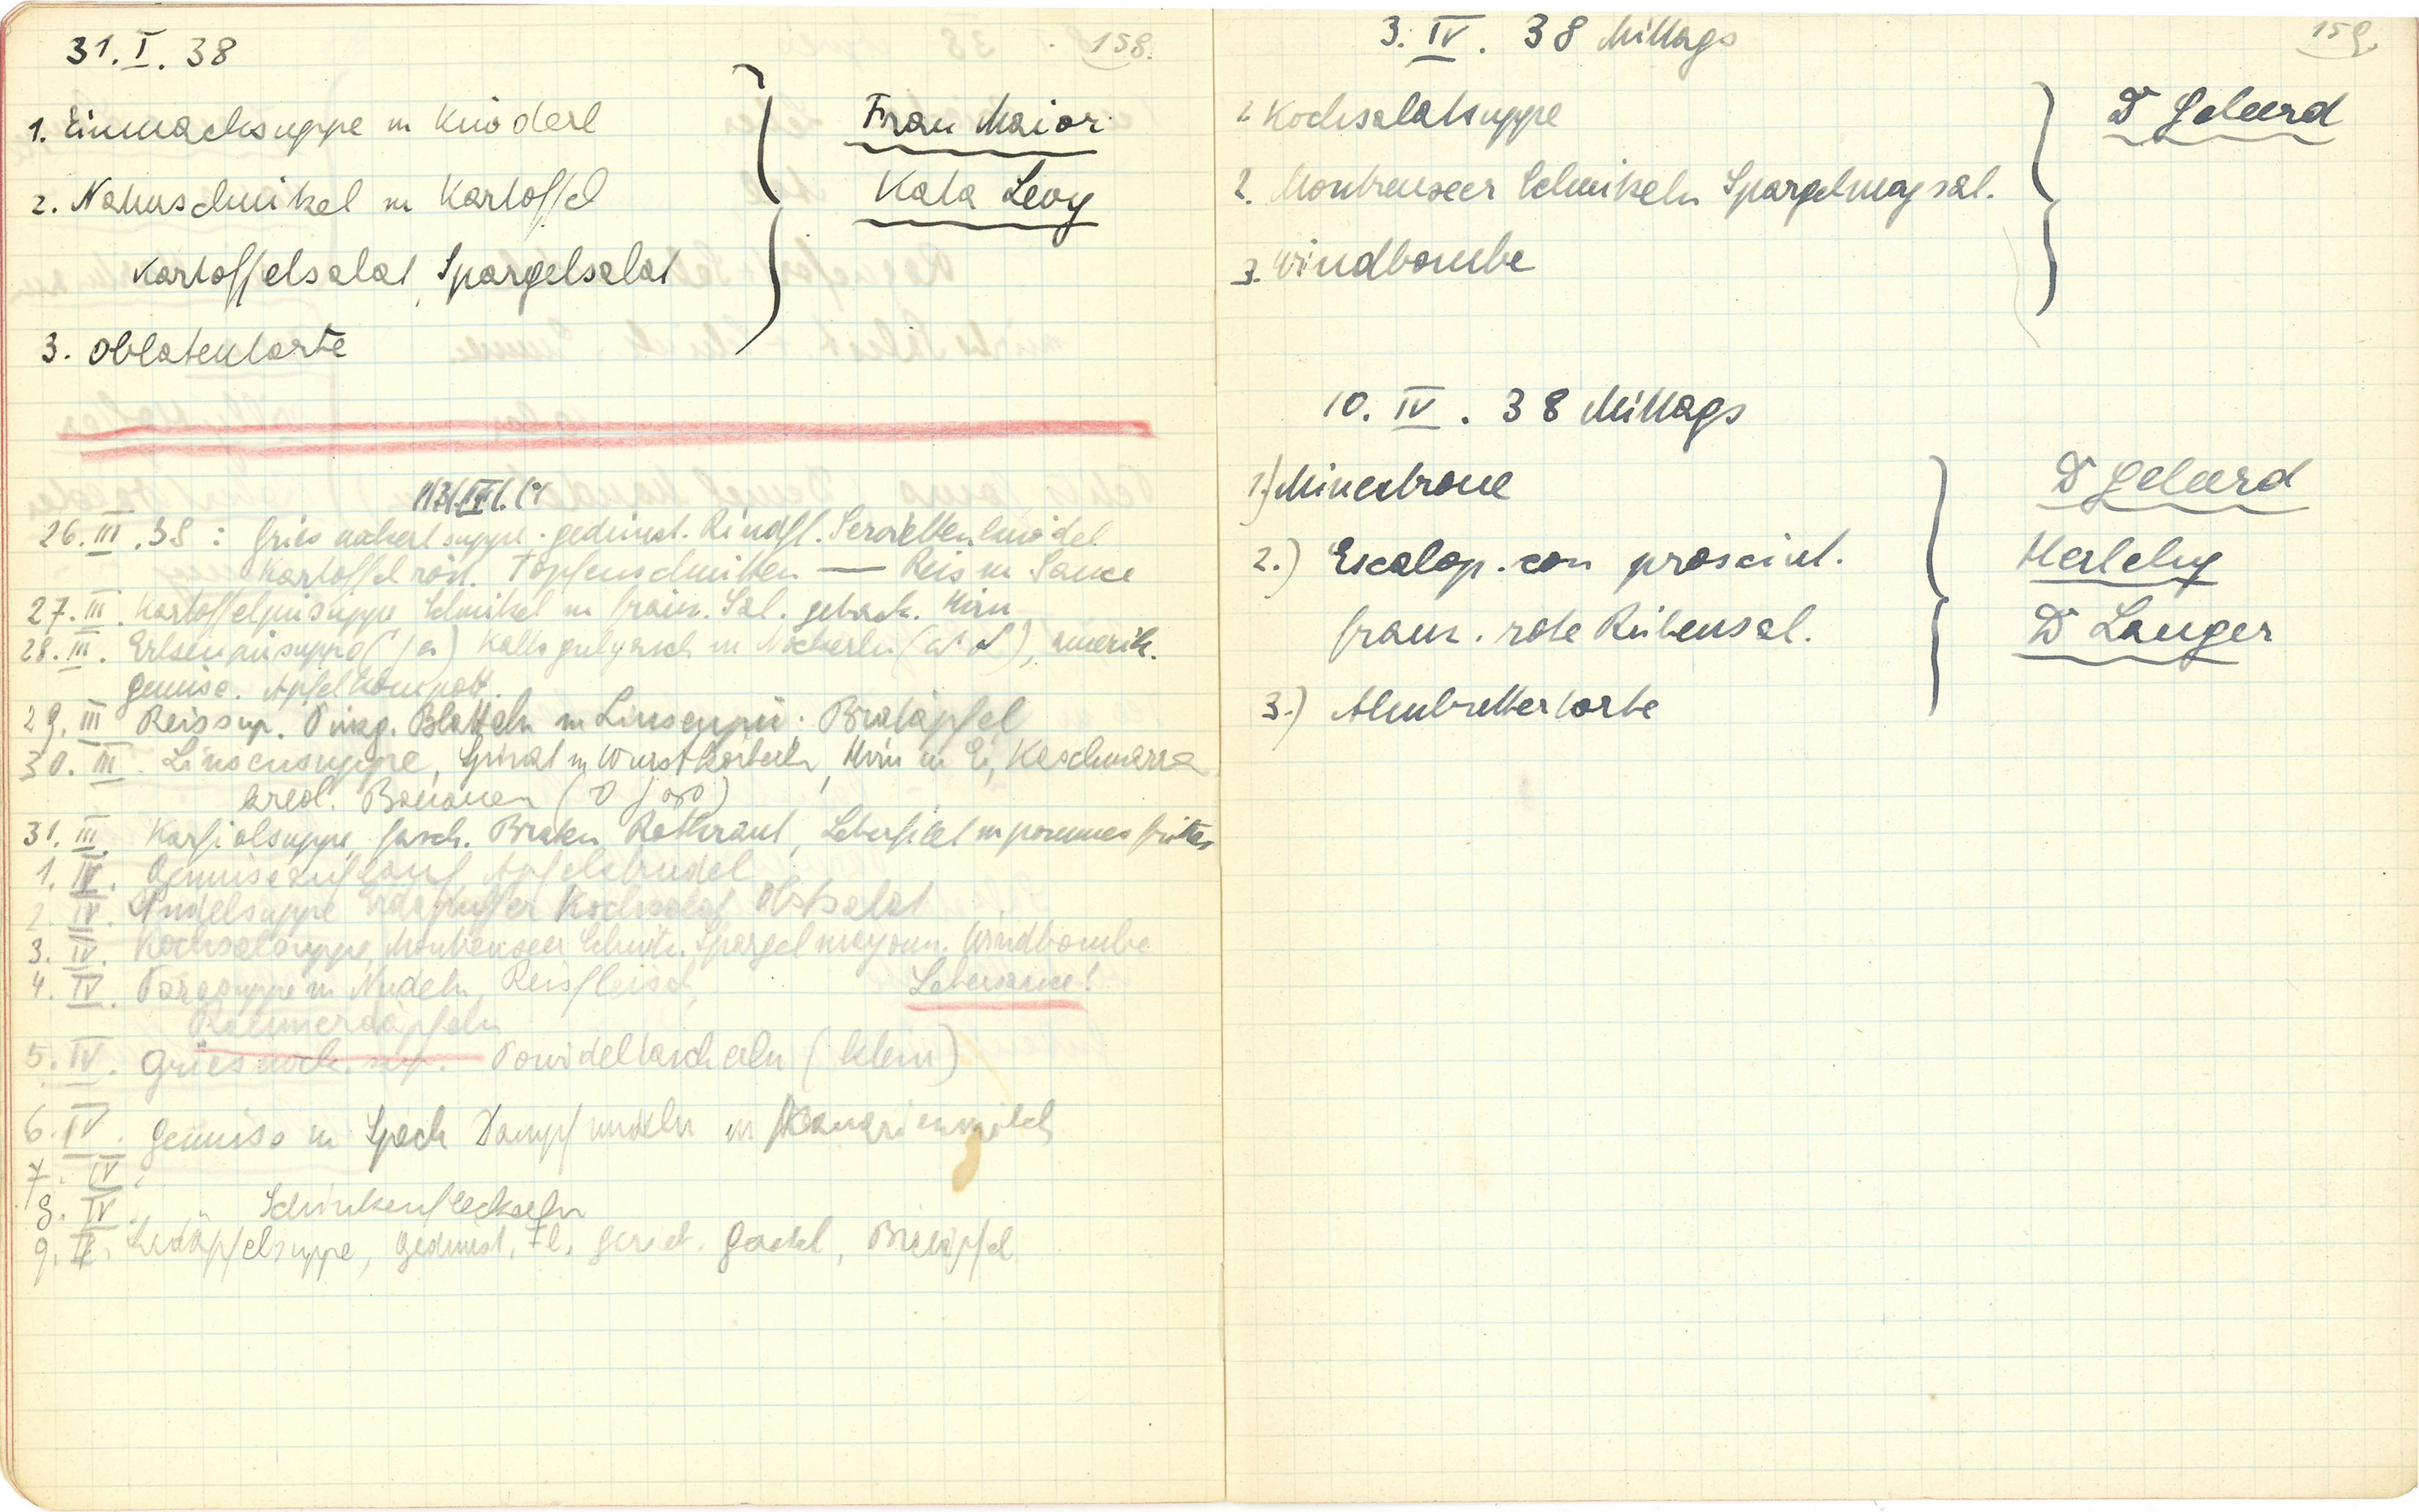 Facing pages from Grete Bibrings household notebook record her menus and guestlists in the weeks before the Anschluss.